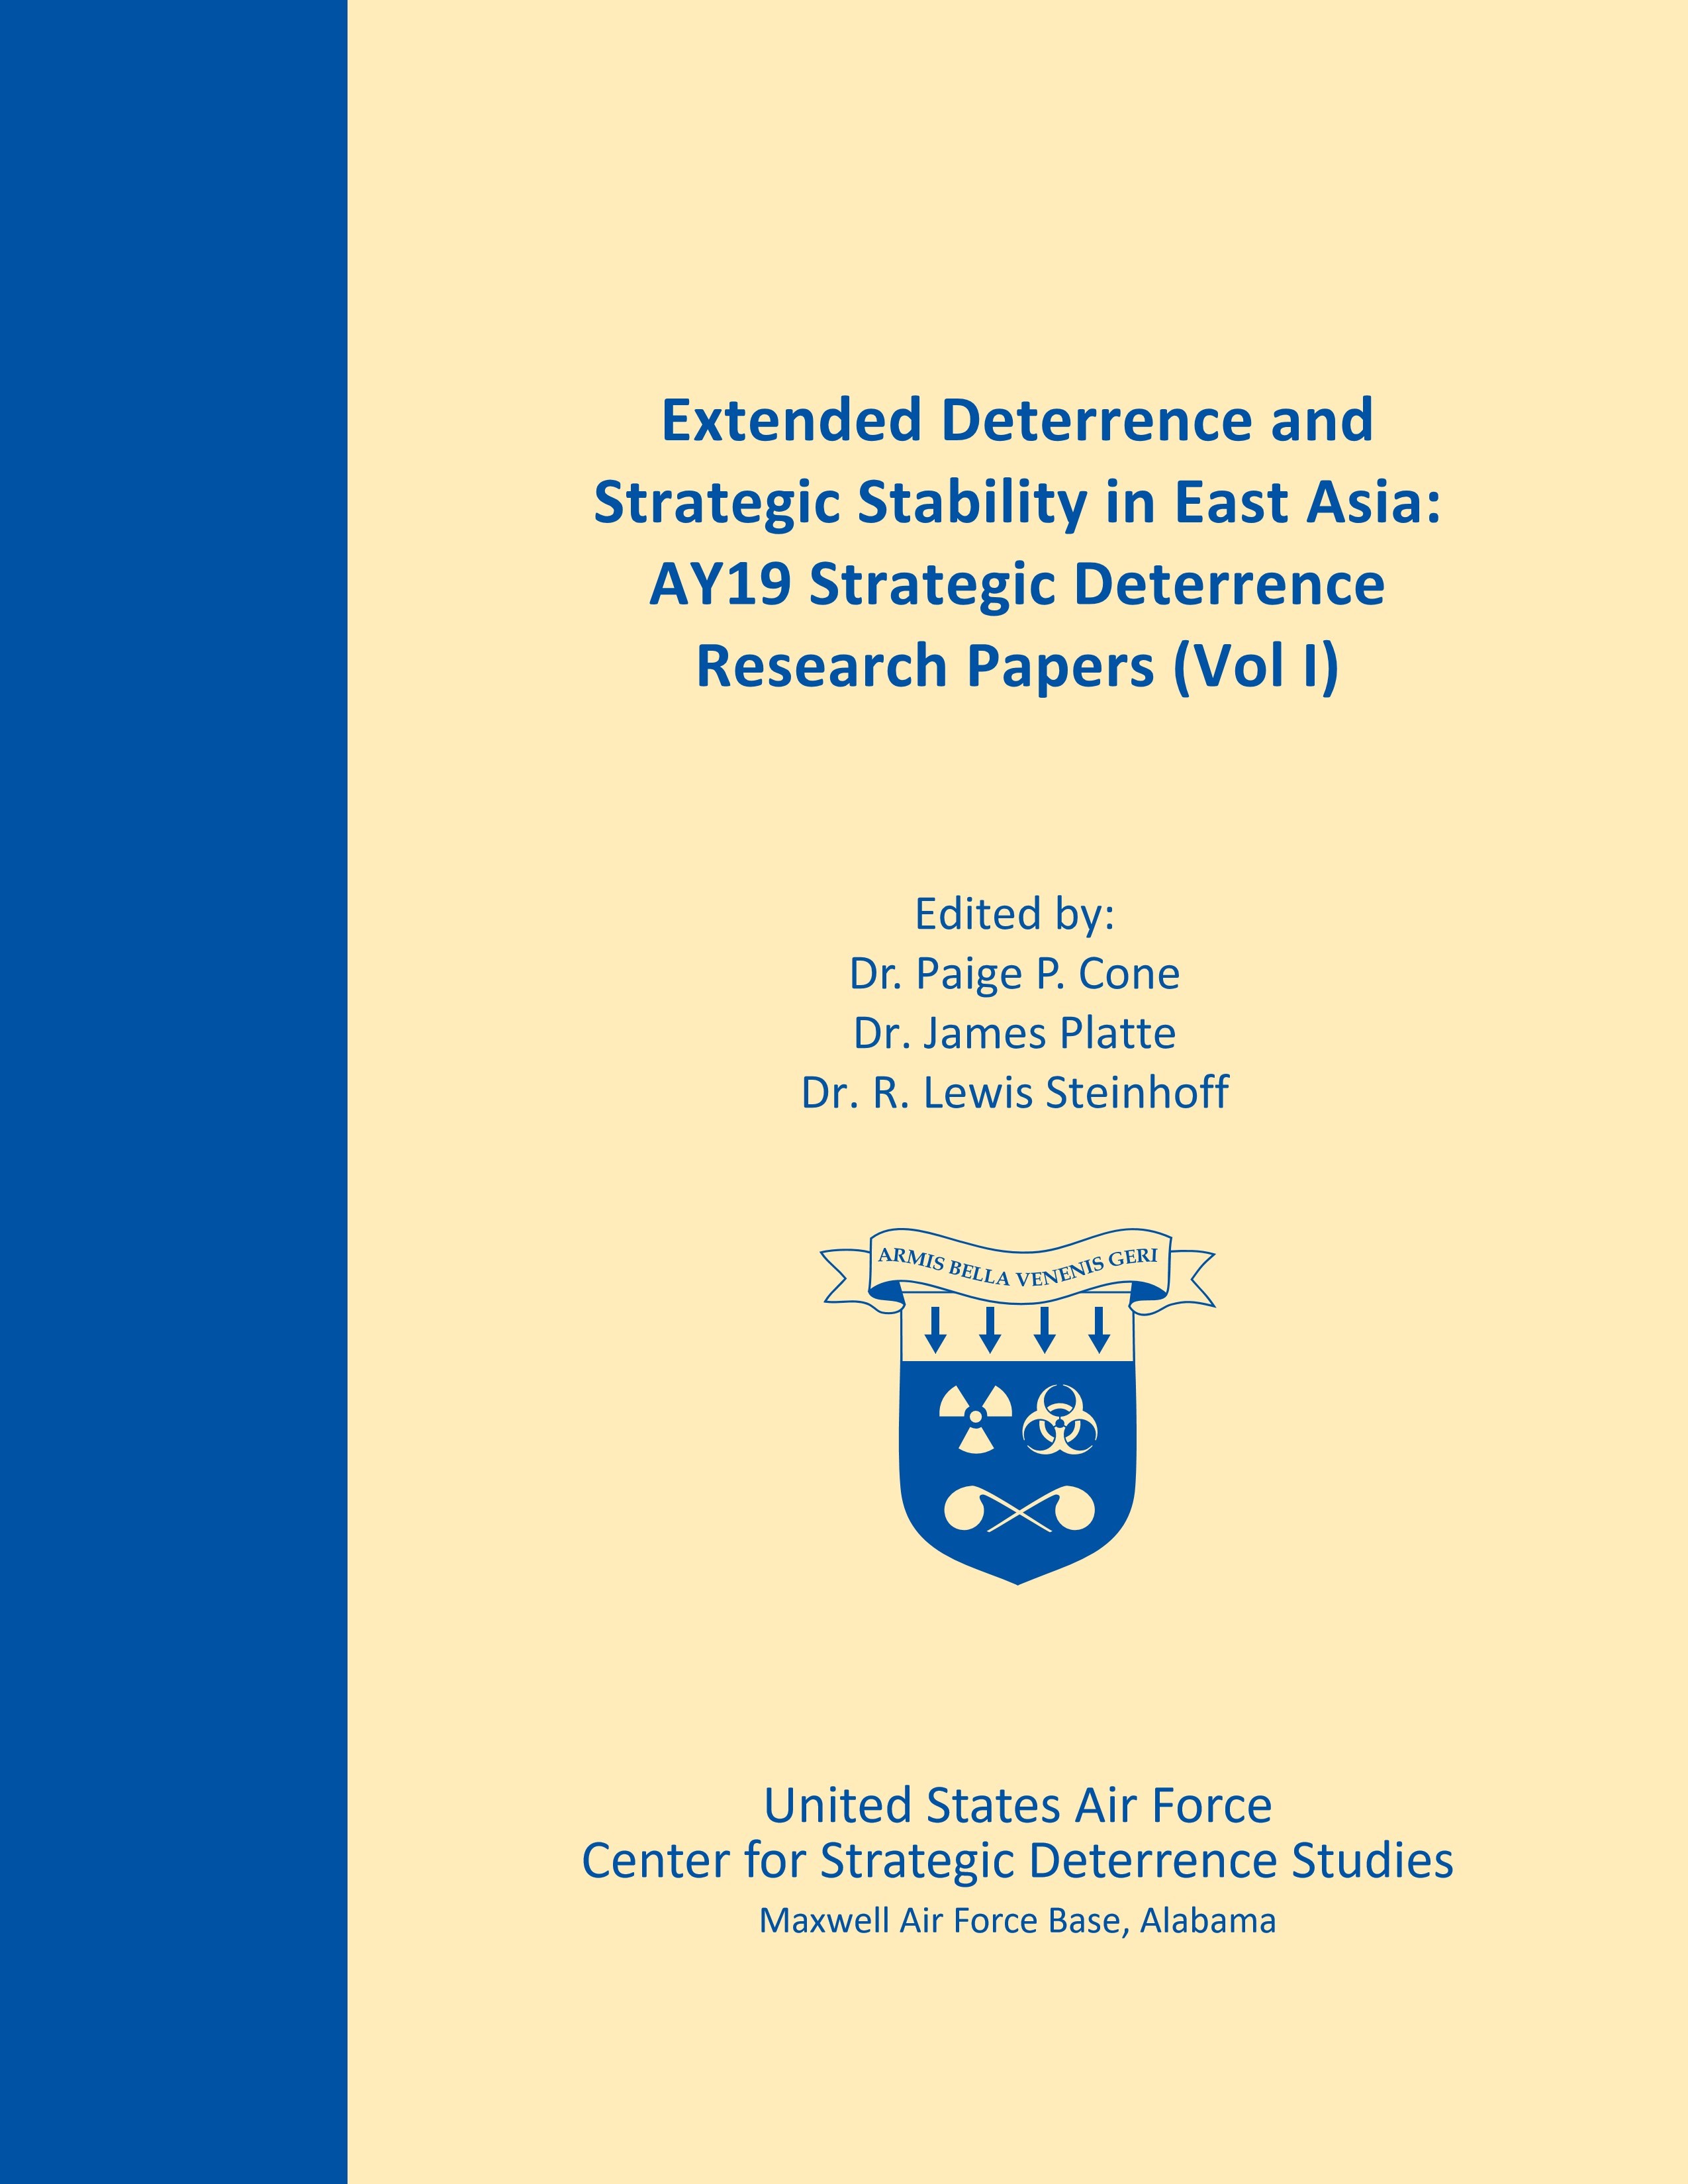 Extended Deterrence and Strategic Stability in East Asia: AY19 Strategic Deterrence Research Papers (Vol I), 2019